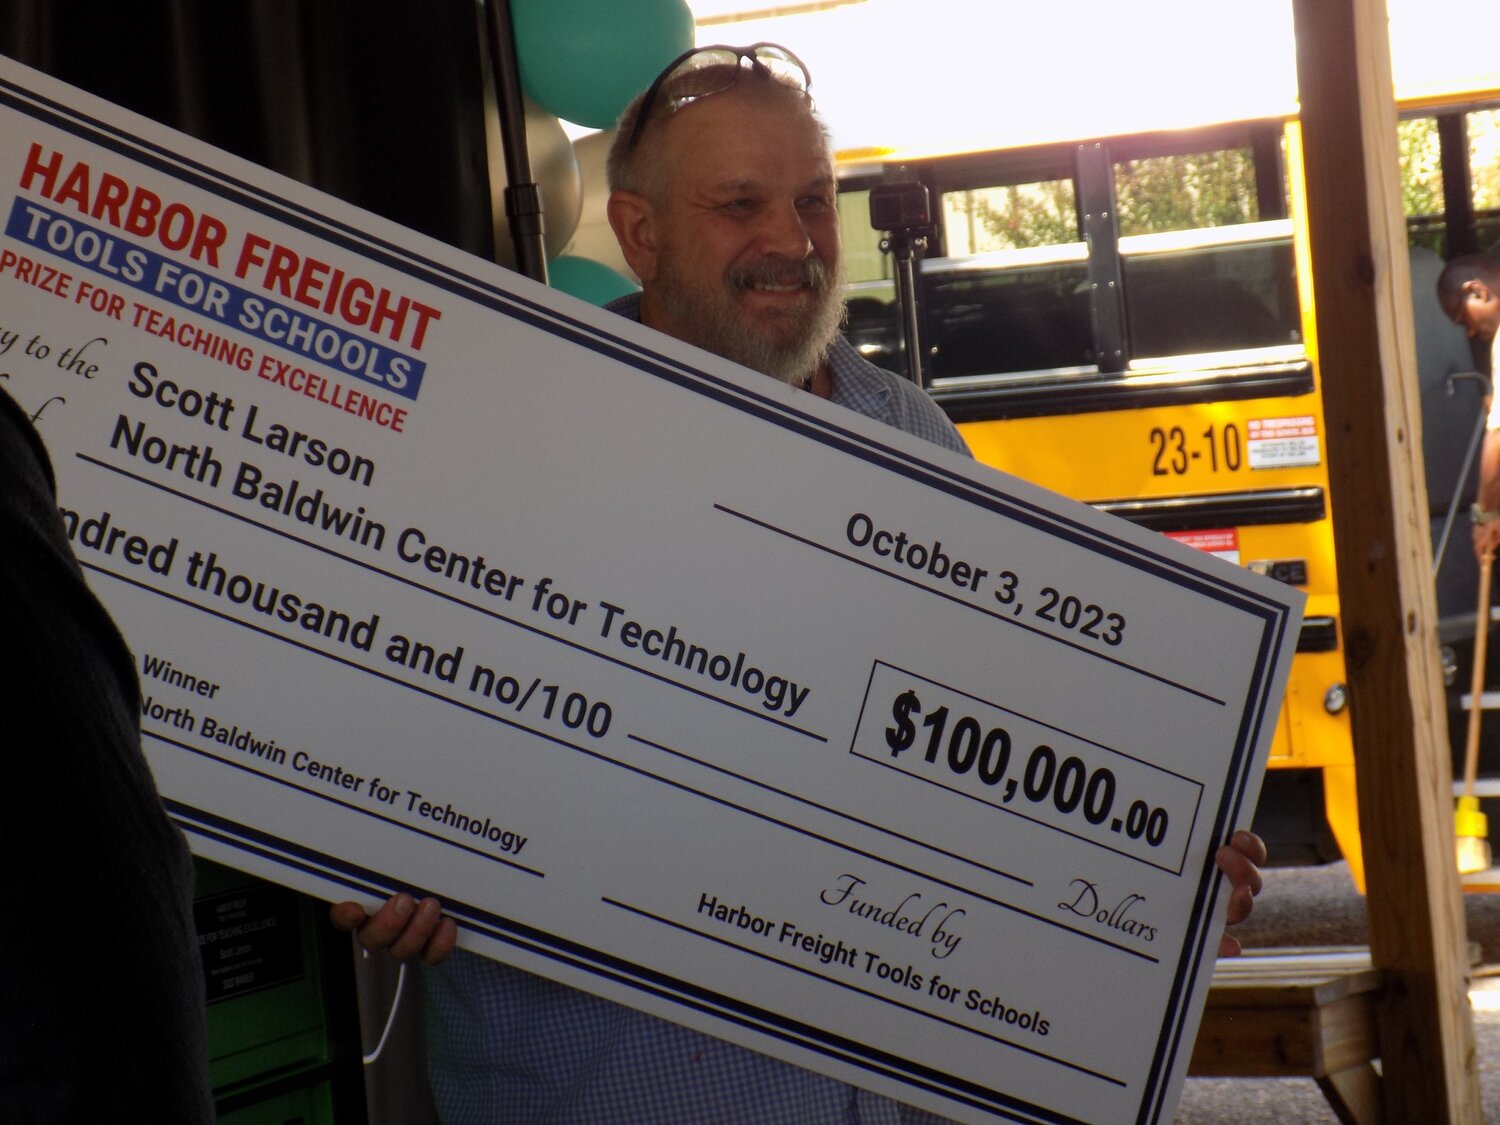 Scott Larson, carpentry and construction teacher at North Baldwin Center for Technology, was surprised with a $100,000 check for his program on Oct. 3.